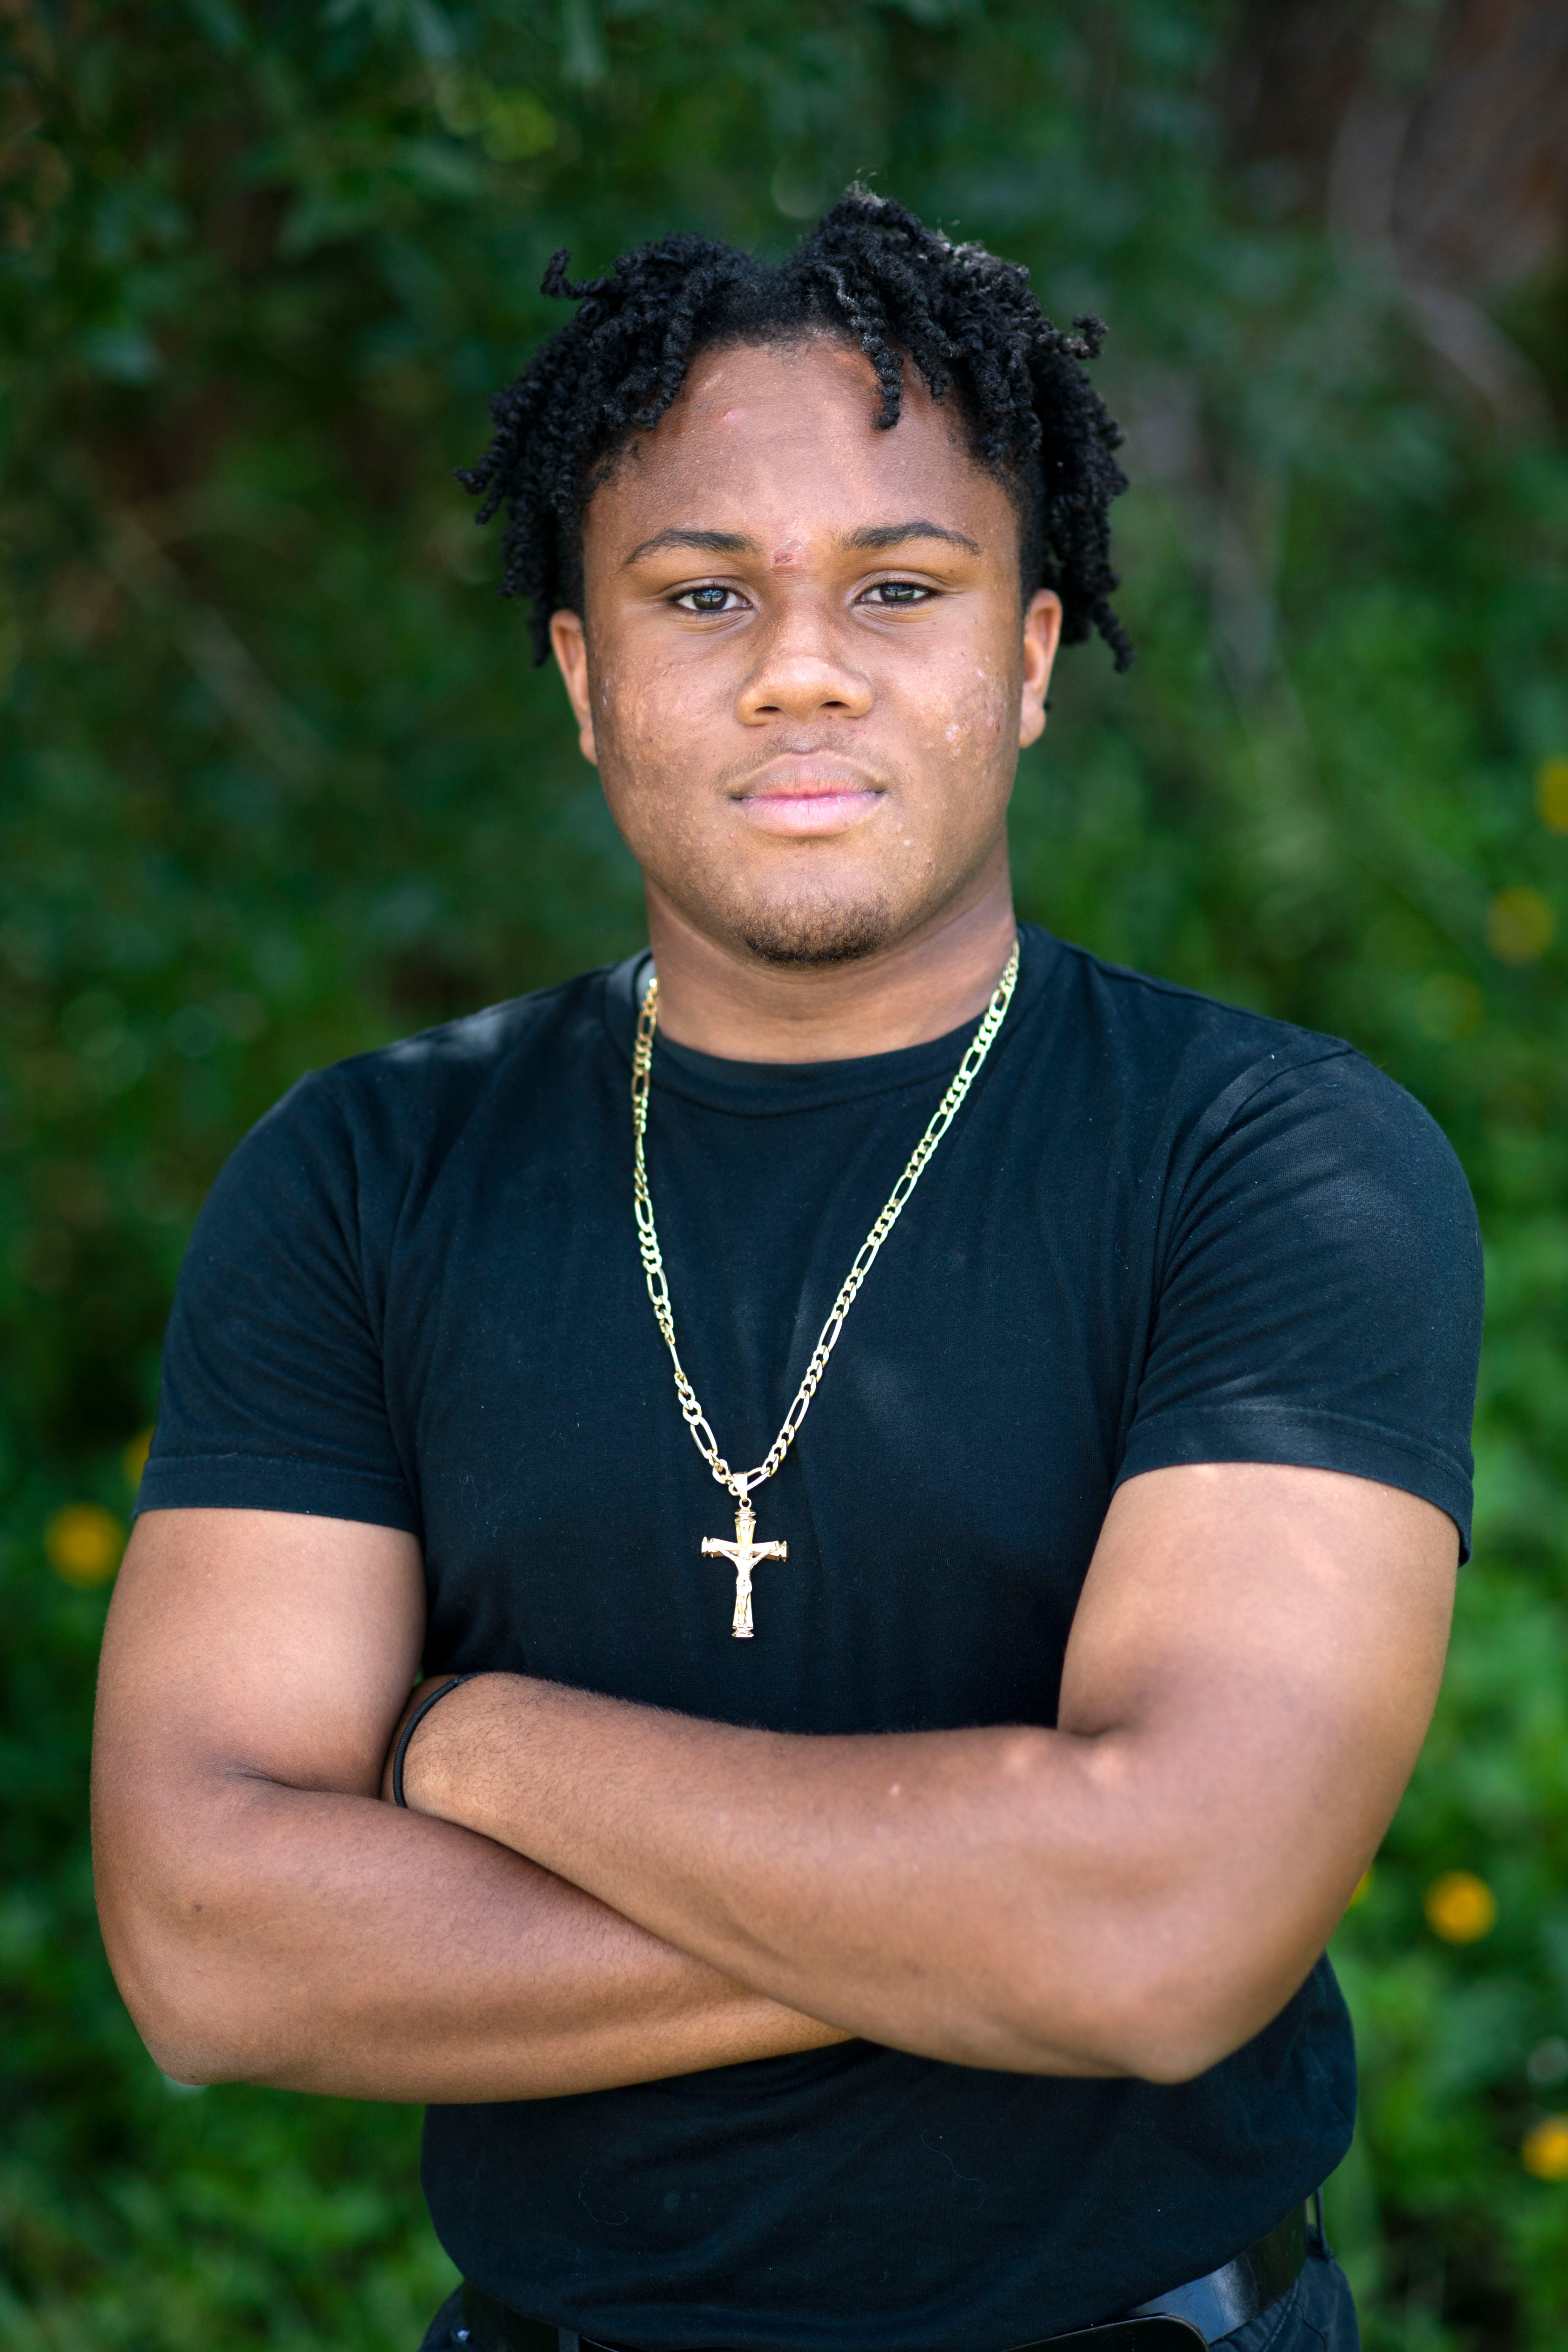 Ervin Rogers III, 18, of Port St. Lucie, is a 2020 graduate of Treasure Coast High School. Rogers has been busy working and hasn't been able to attend any local Black Lives Matter protests, but is appreciative of the movement sweeping the country. "It's a great thing to see the shedding of light on the darkness in the country," Rogers said.